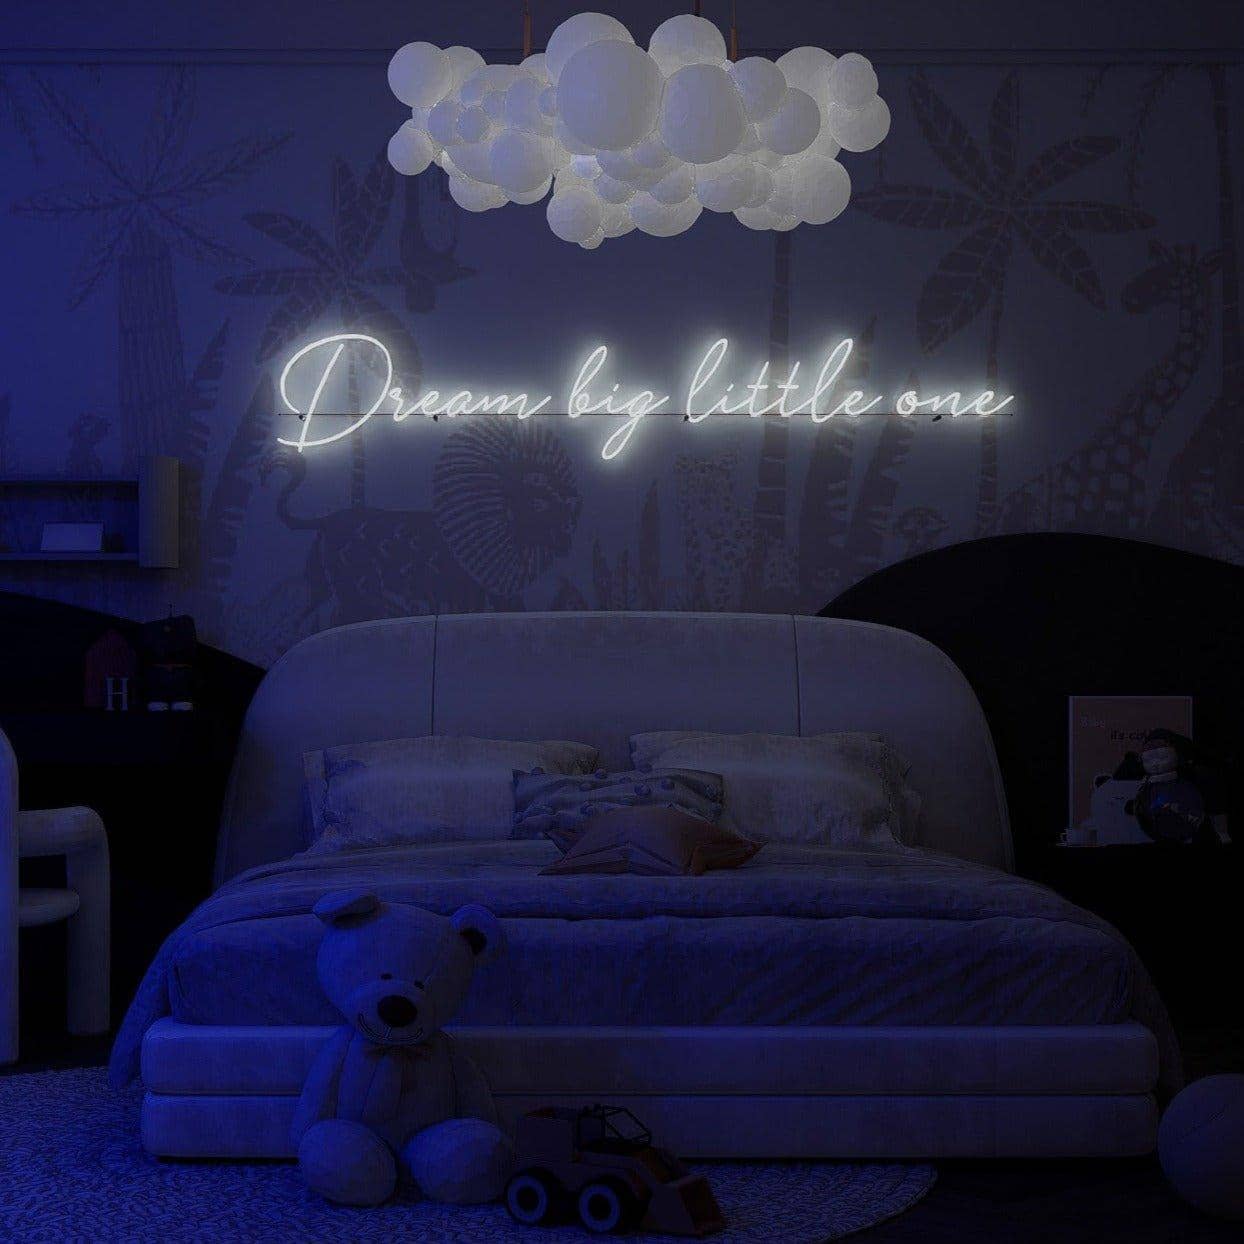 light-up-the-night-with-white-neon-light-size-chart-hanging-for-display-in-the-bedroom-dream-big-little-one